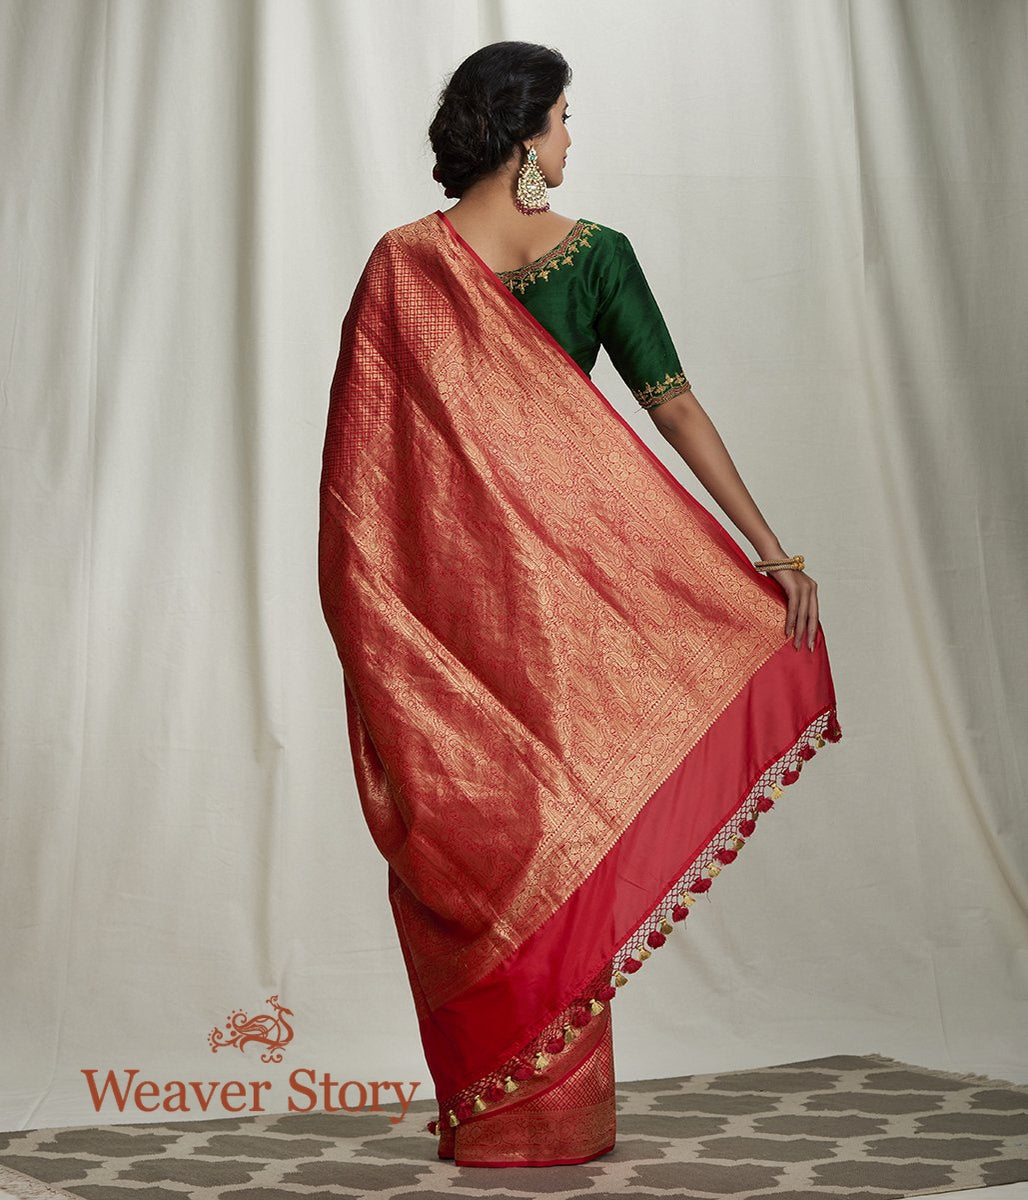 Handwoven_Red_Zari_Tanchoi_Saree_with_Small_Booti_WeaverStory_03